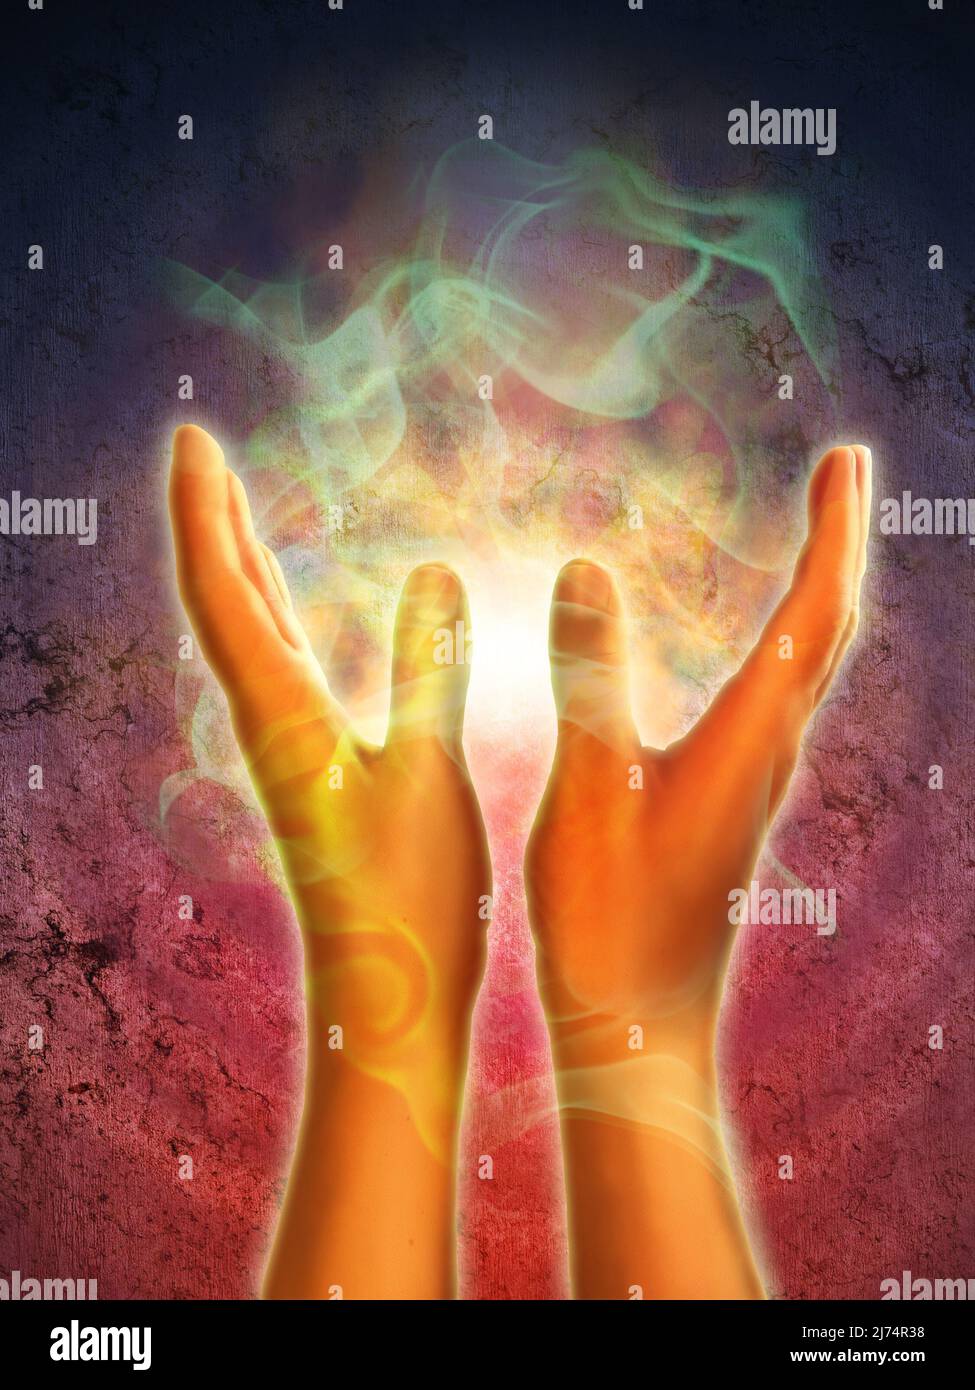 Mystical energy generating from open hands. Digital illustration. Stock Photo